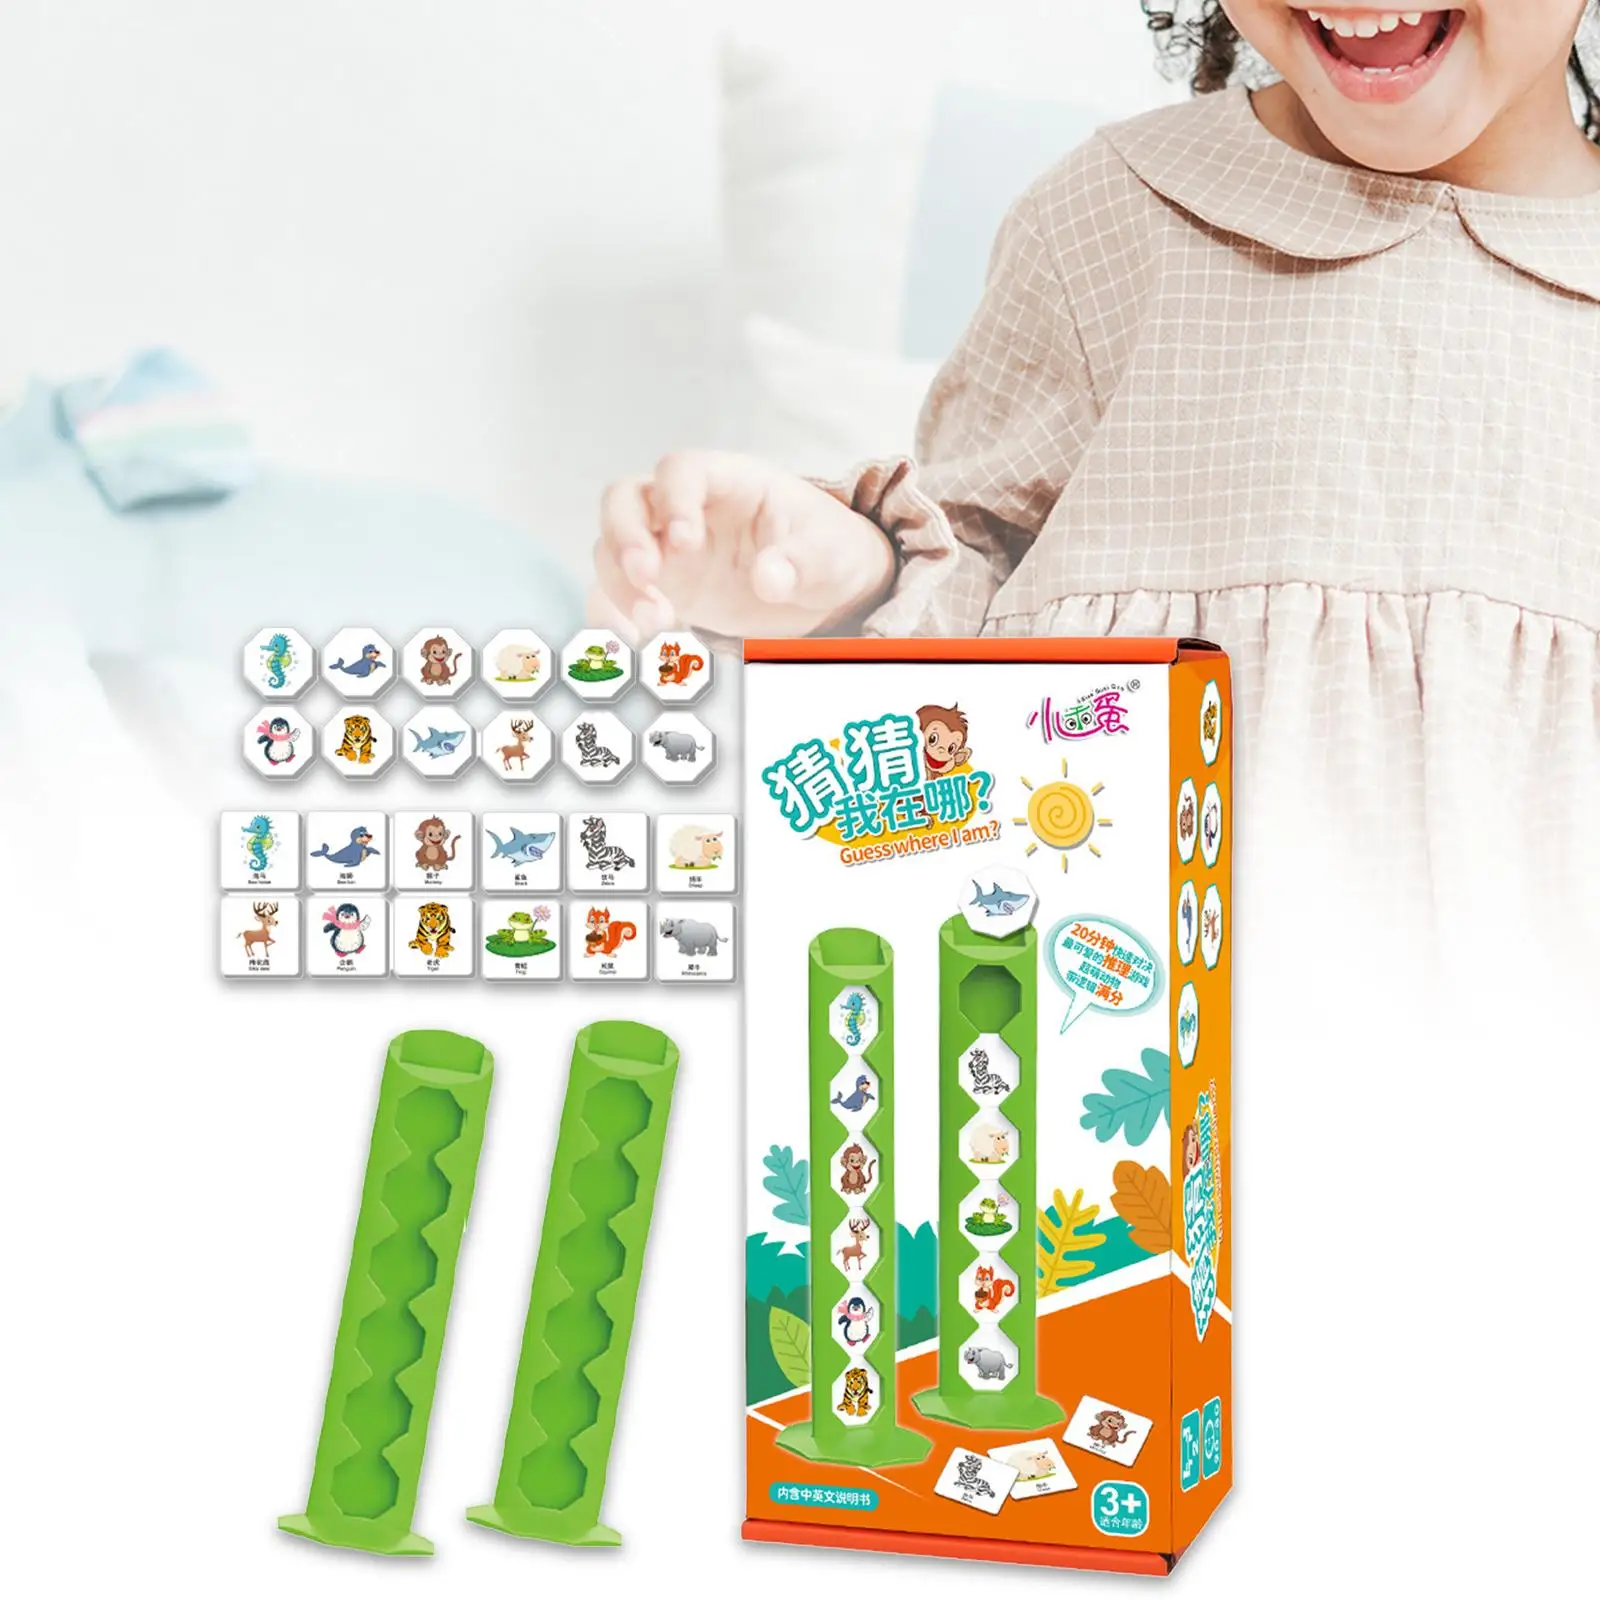 Guessing Game Educational Toy Game for Boys Travel Games Family Game